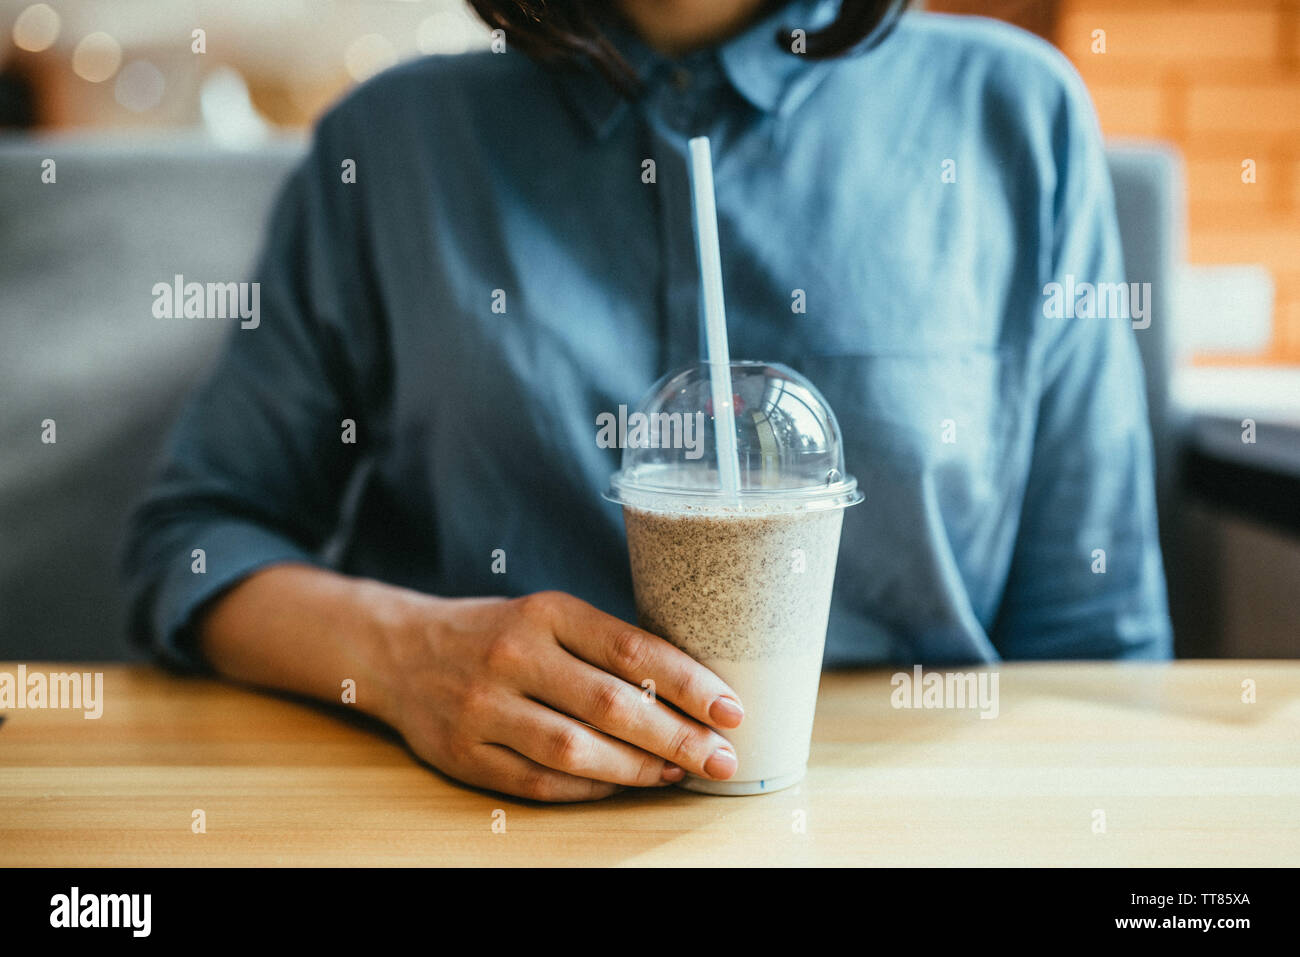 Milk Shake In Plastic Cups Images – Browse 21,725 Stock Photos